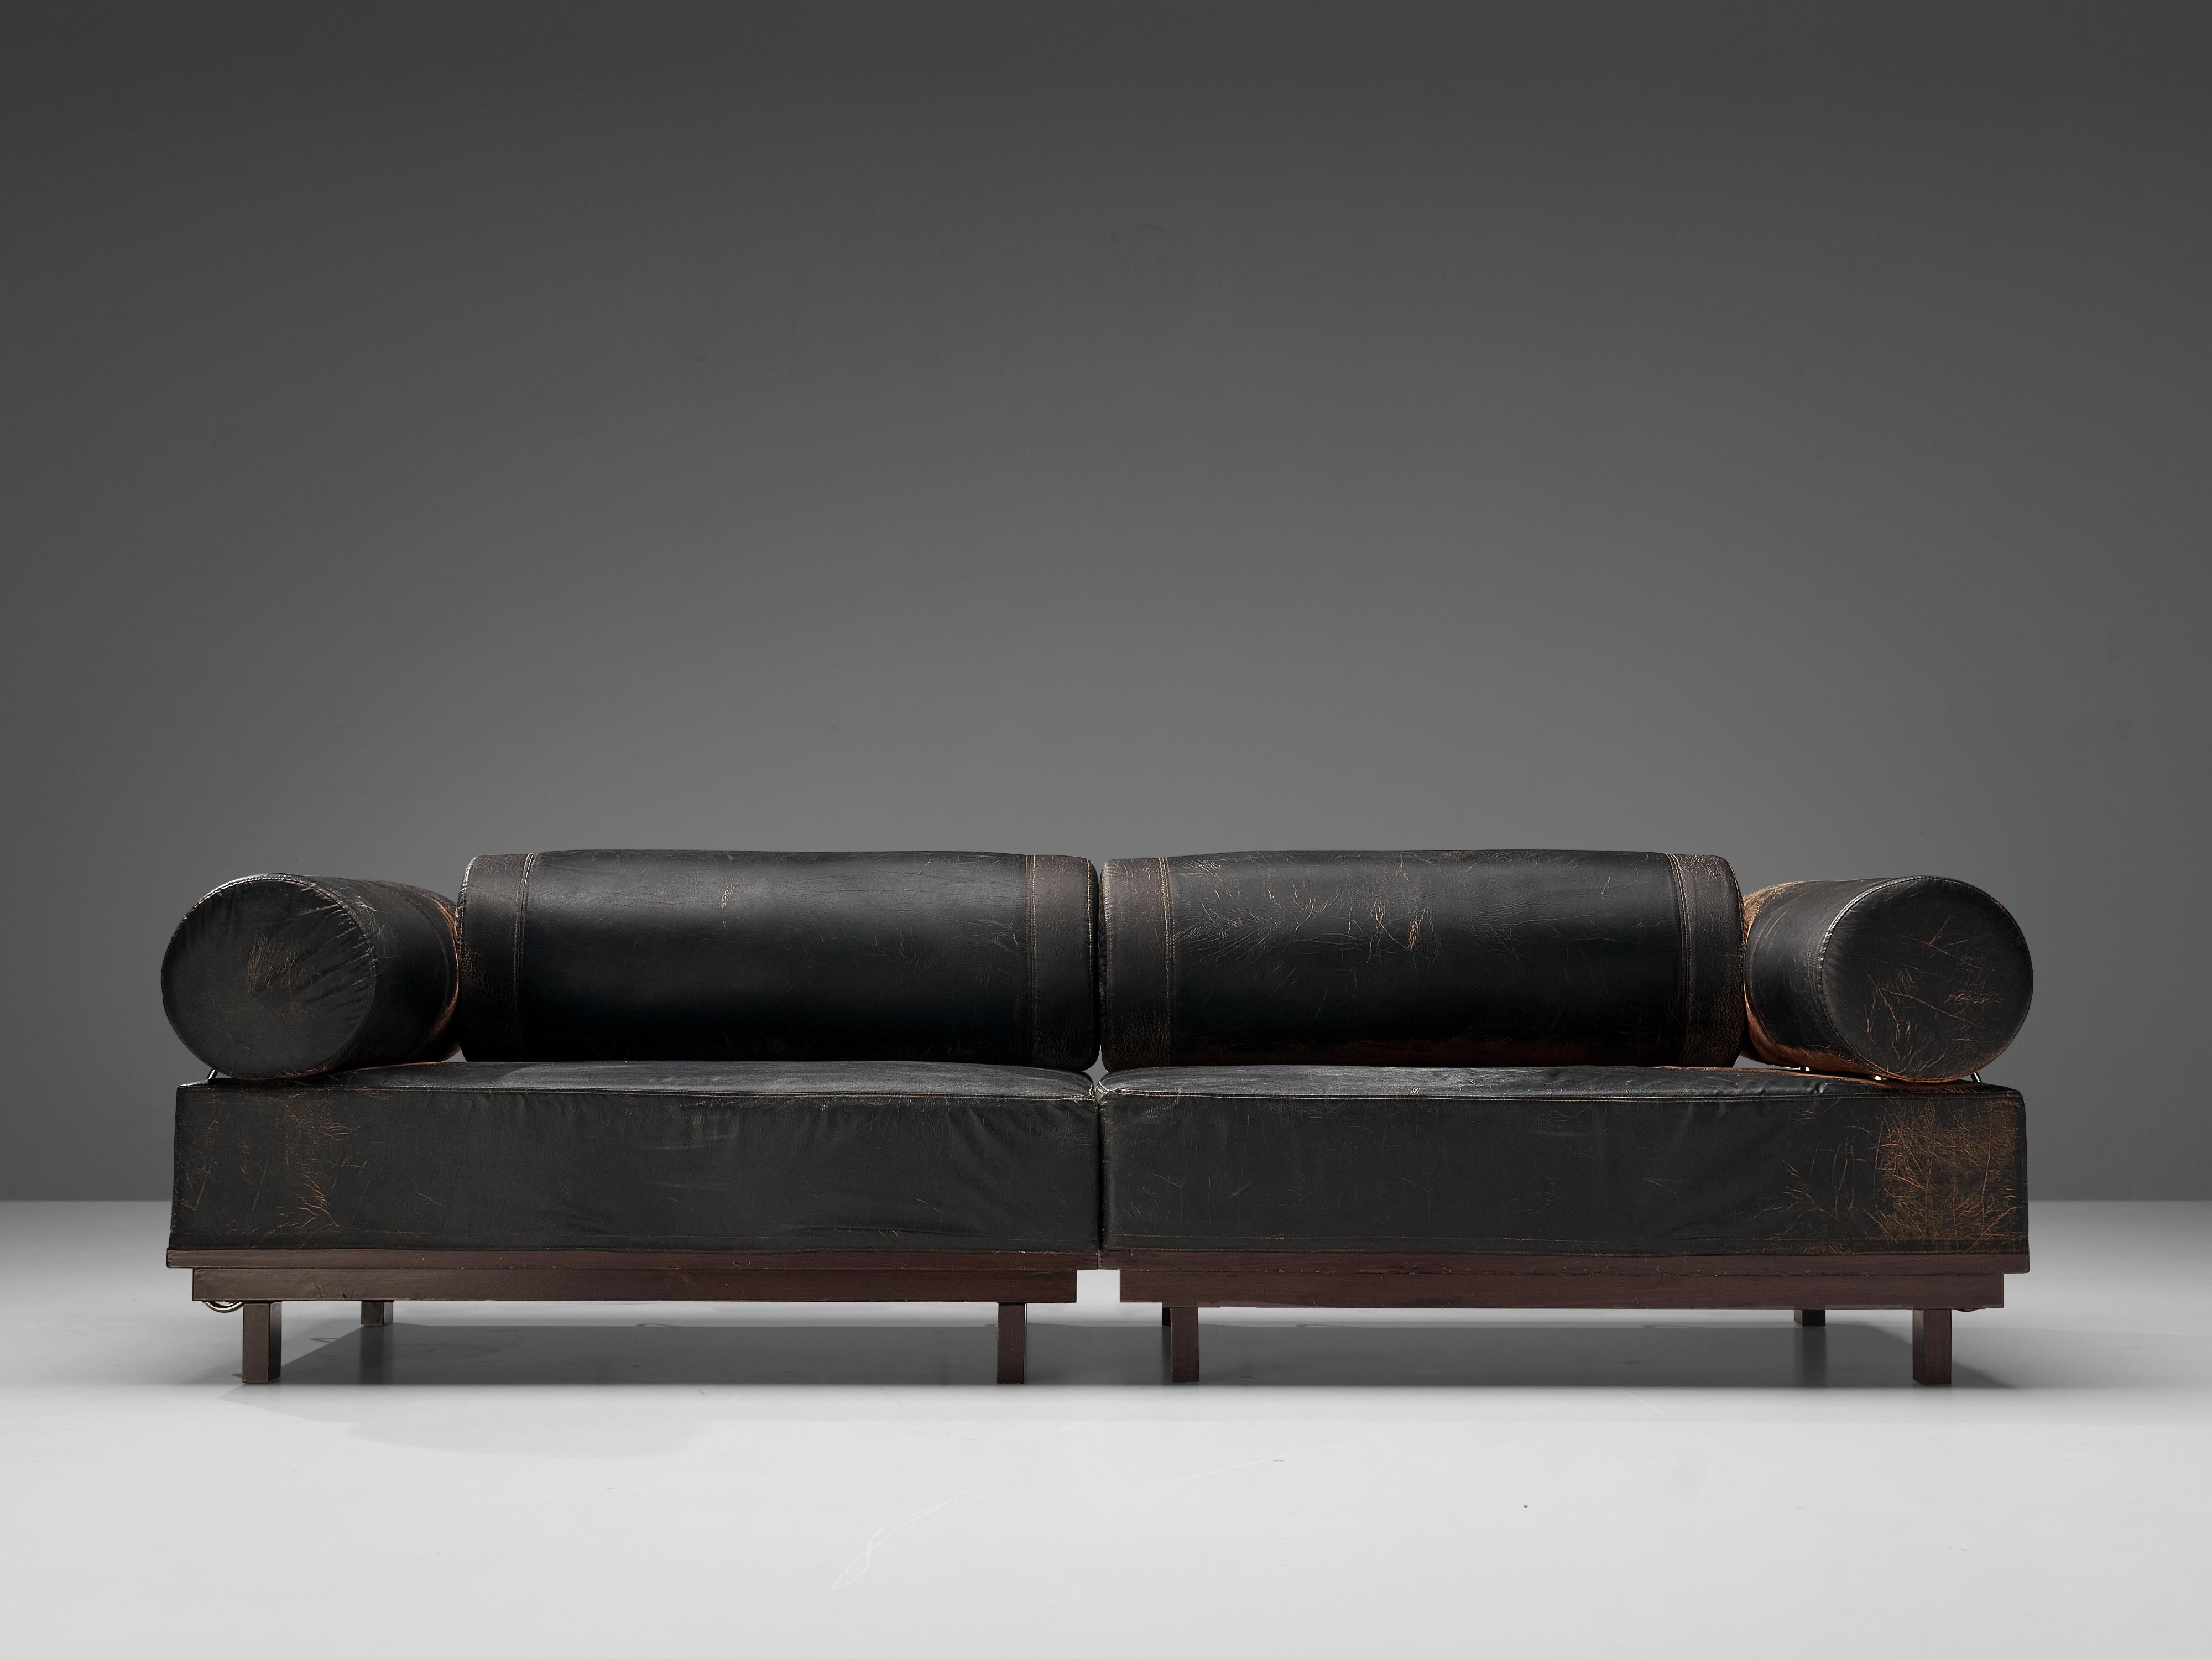 European Bulky Modular Sofa in Leatherette and Metal Details